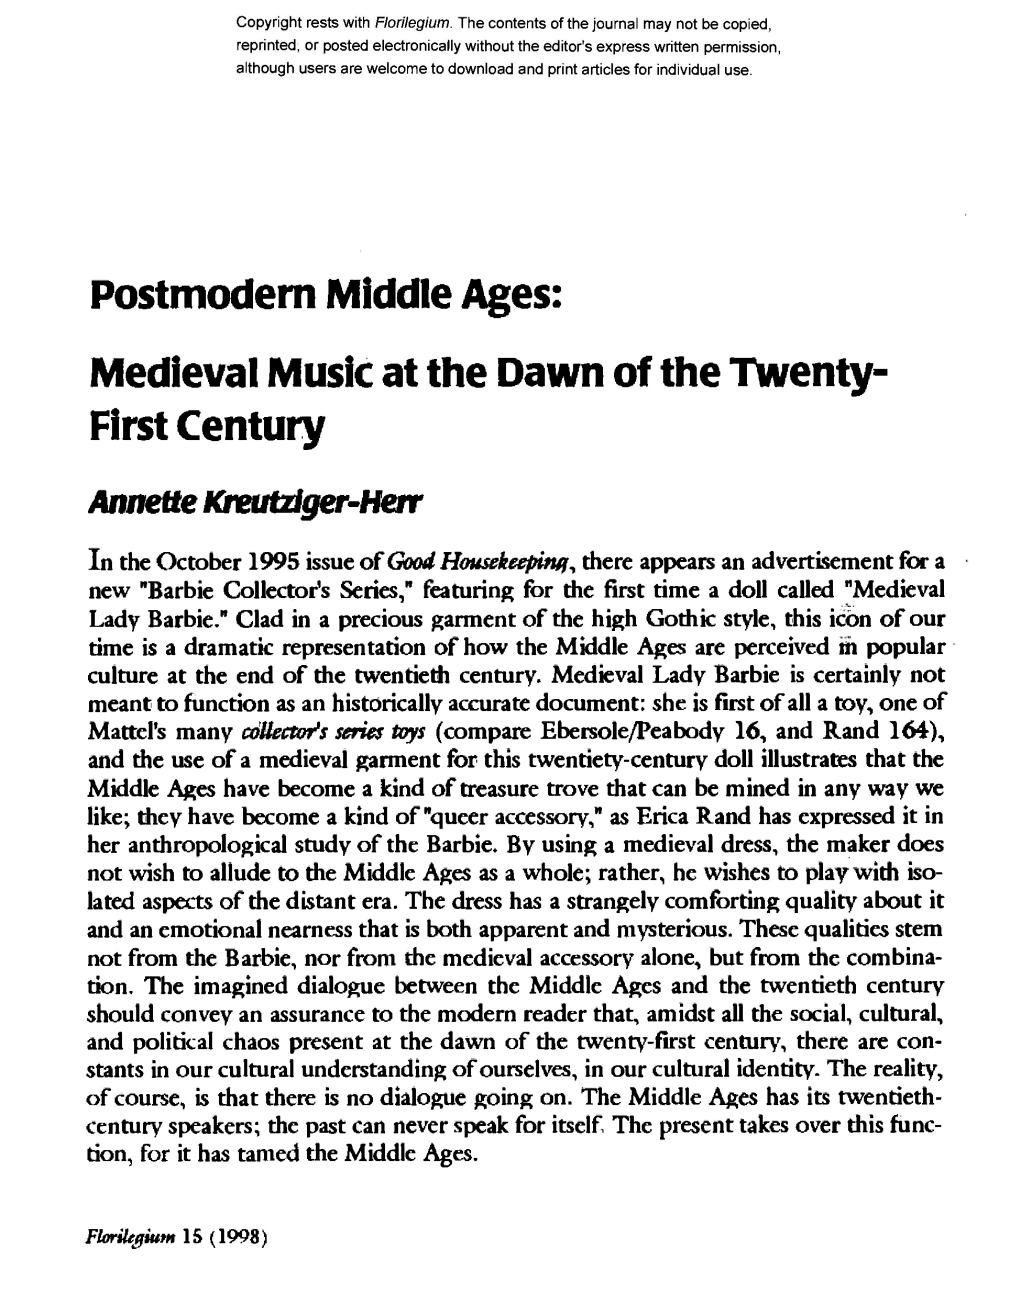 Postmodern Middle Ages: Medieval Music at the Dawn of the Twenty- First Century